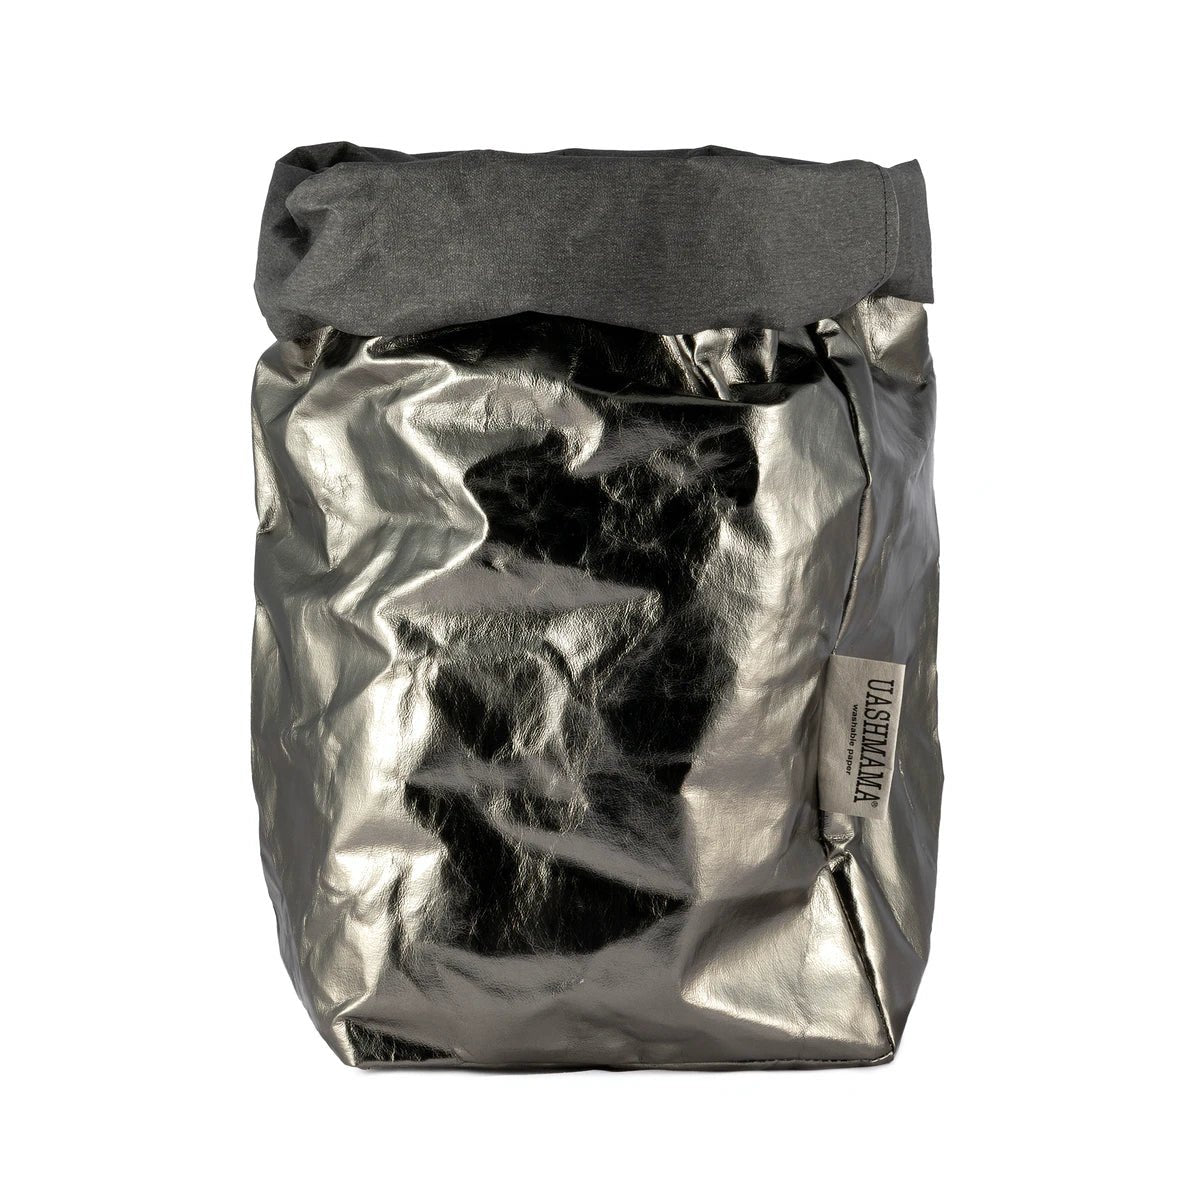 A washable paper bag is shown. The bag is rolled down at the top and features a UASHMAMA logo label on the bottom left corner. The bag pictured is the extra large size in metallic dark grey.